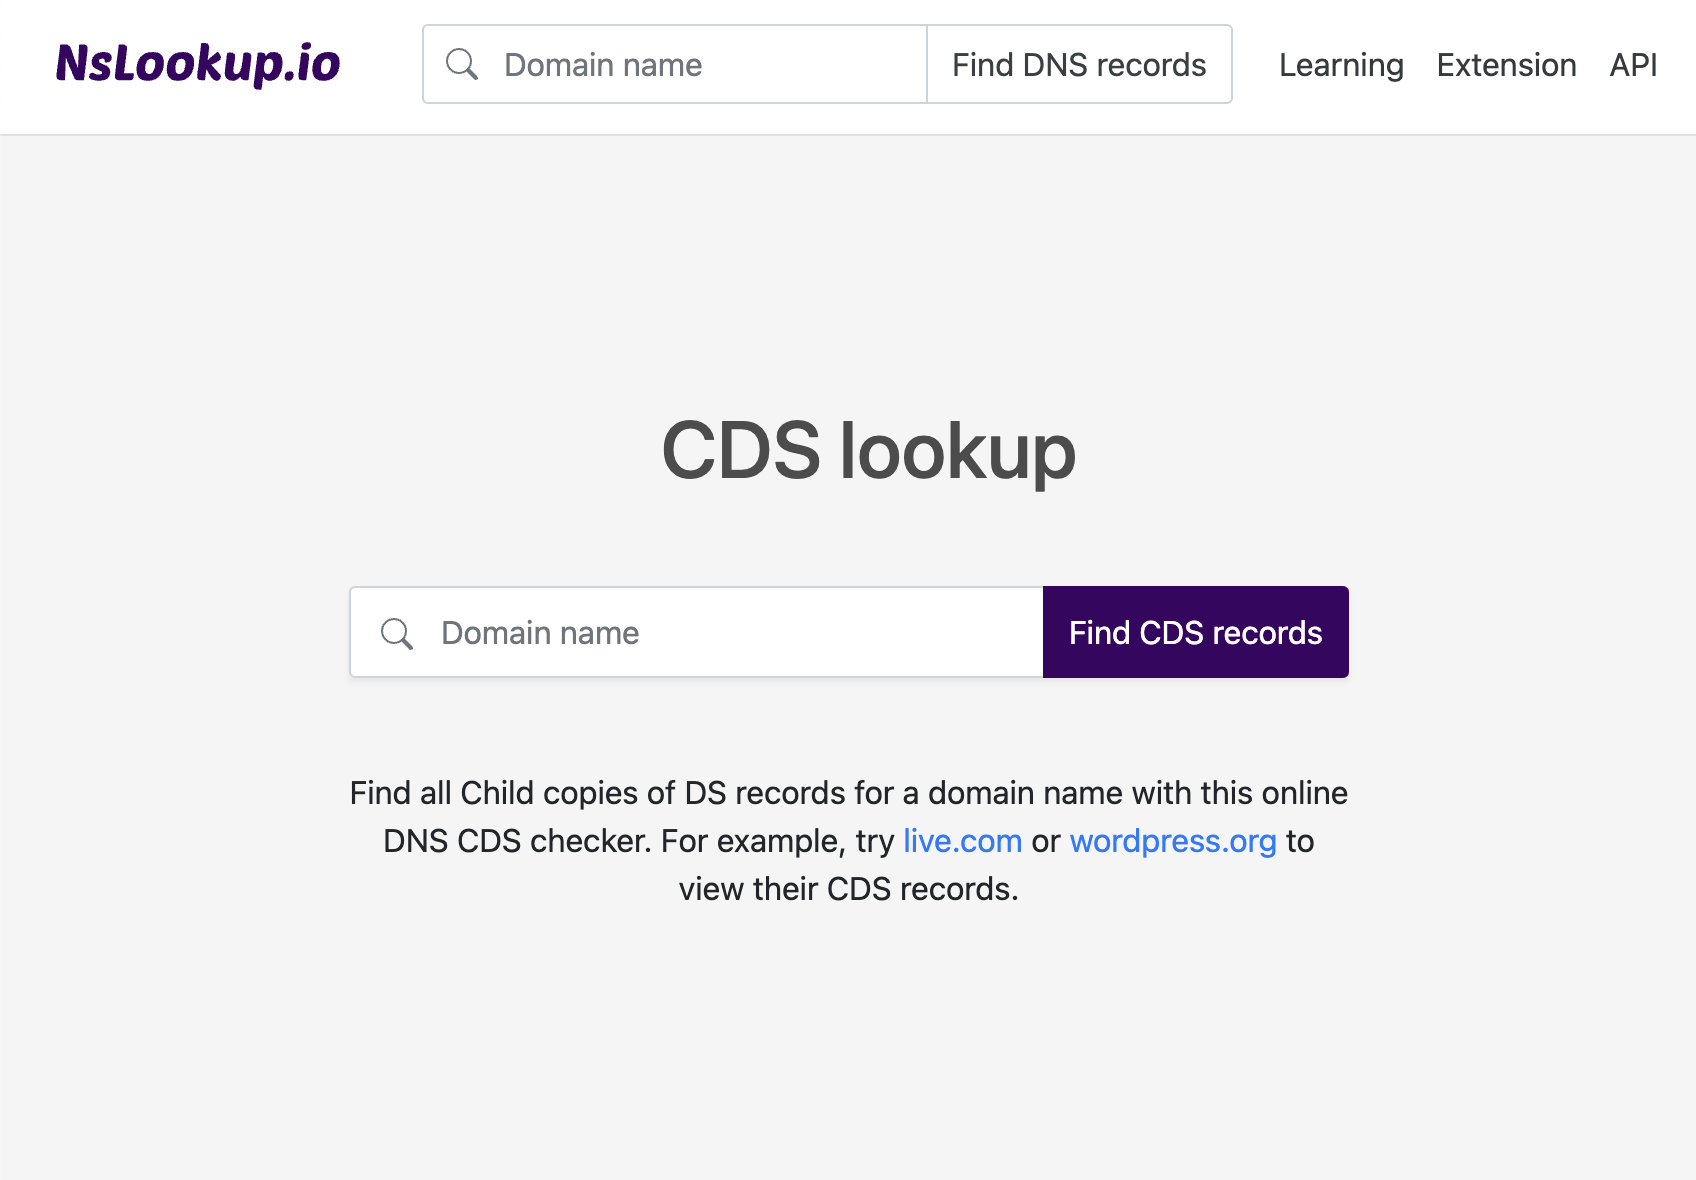 Open the CDS lookup tool